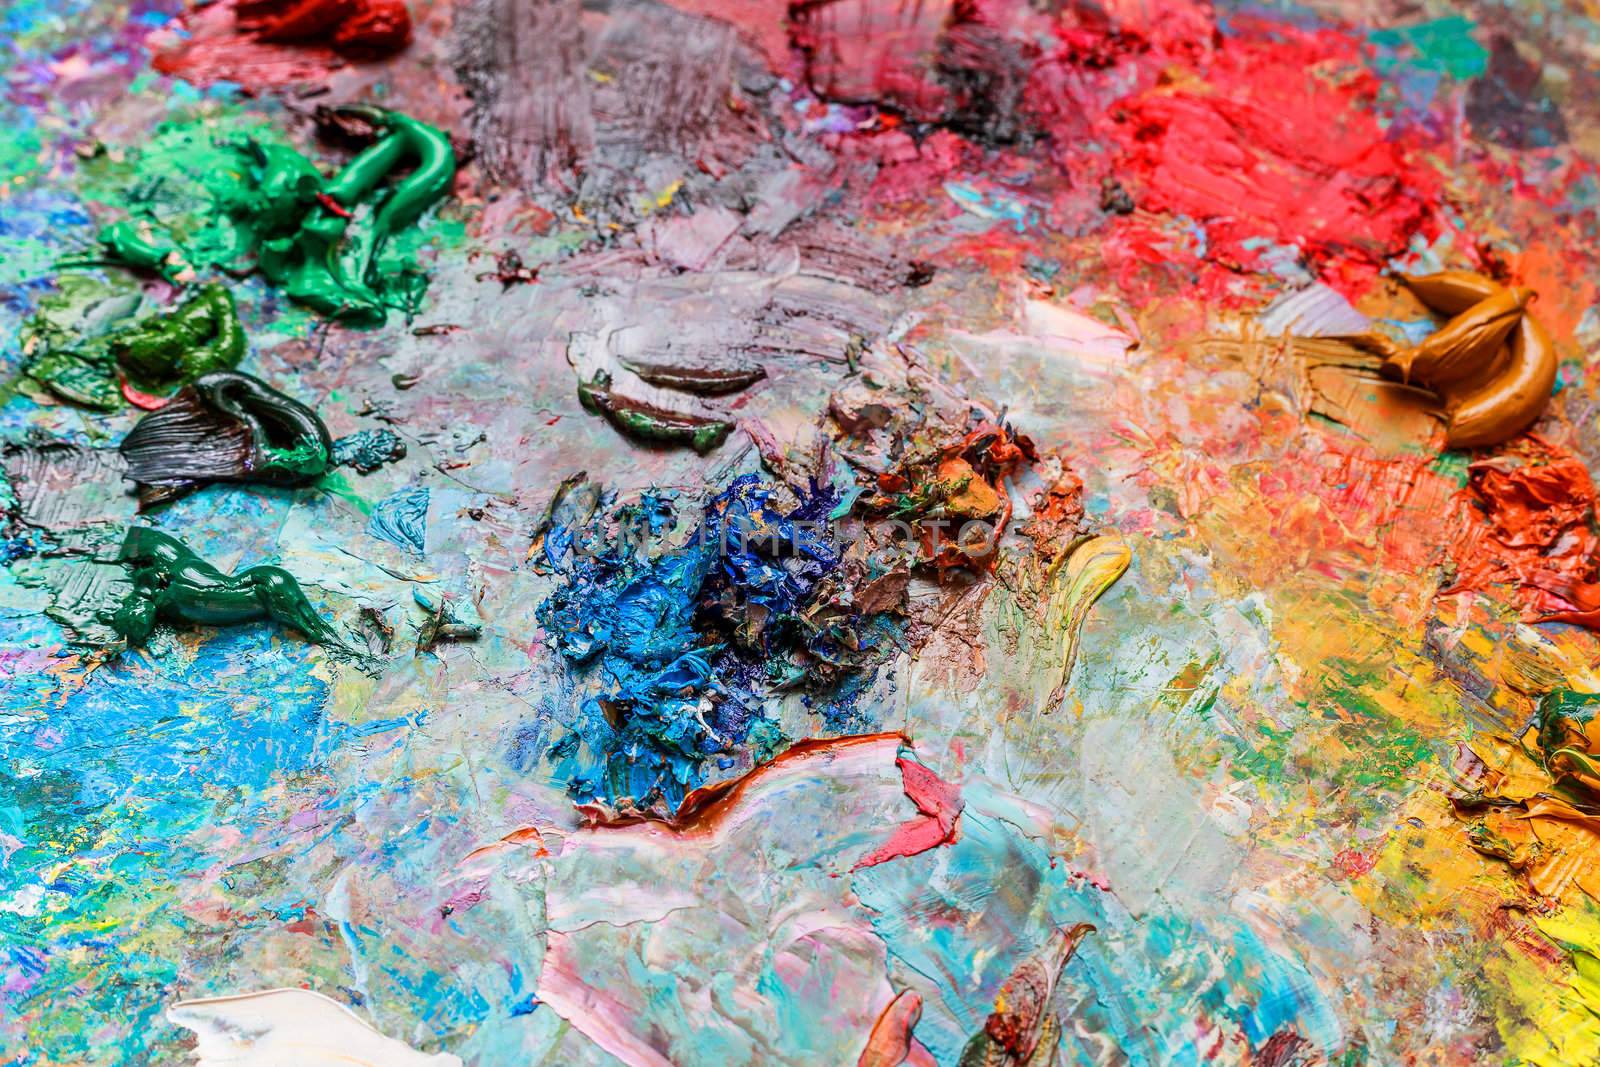 The artist's palette for mixing colors, close-up.